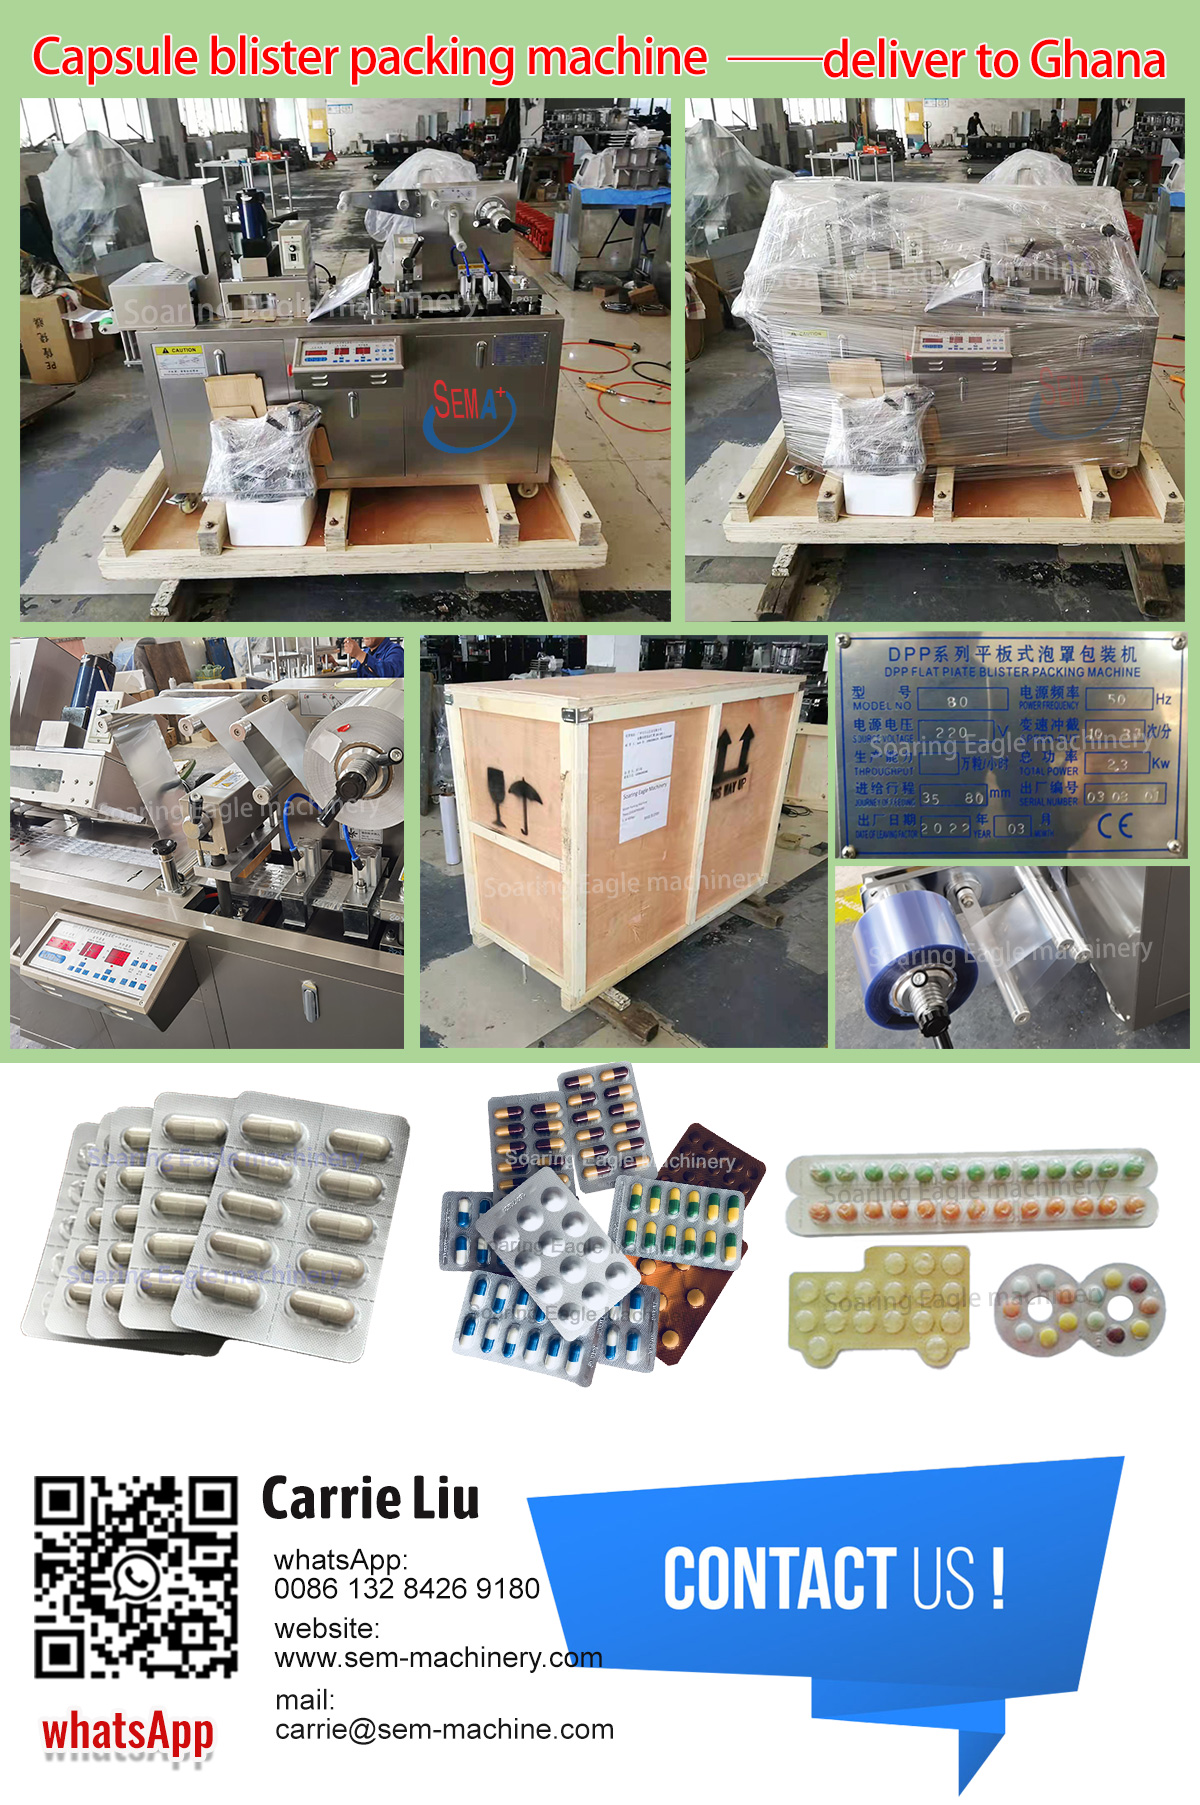 Capsule blister packing machine——delivered to Ghana